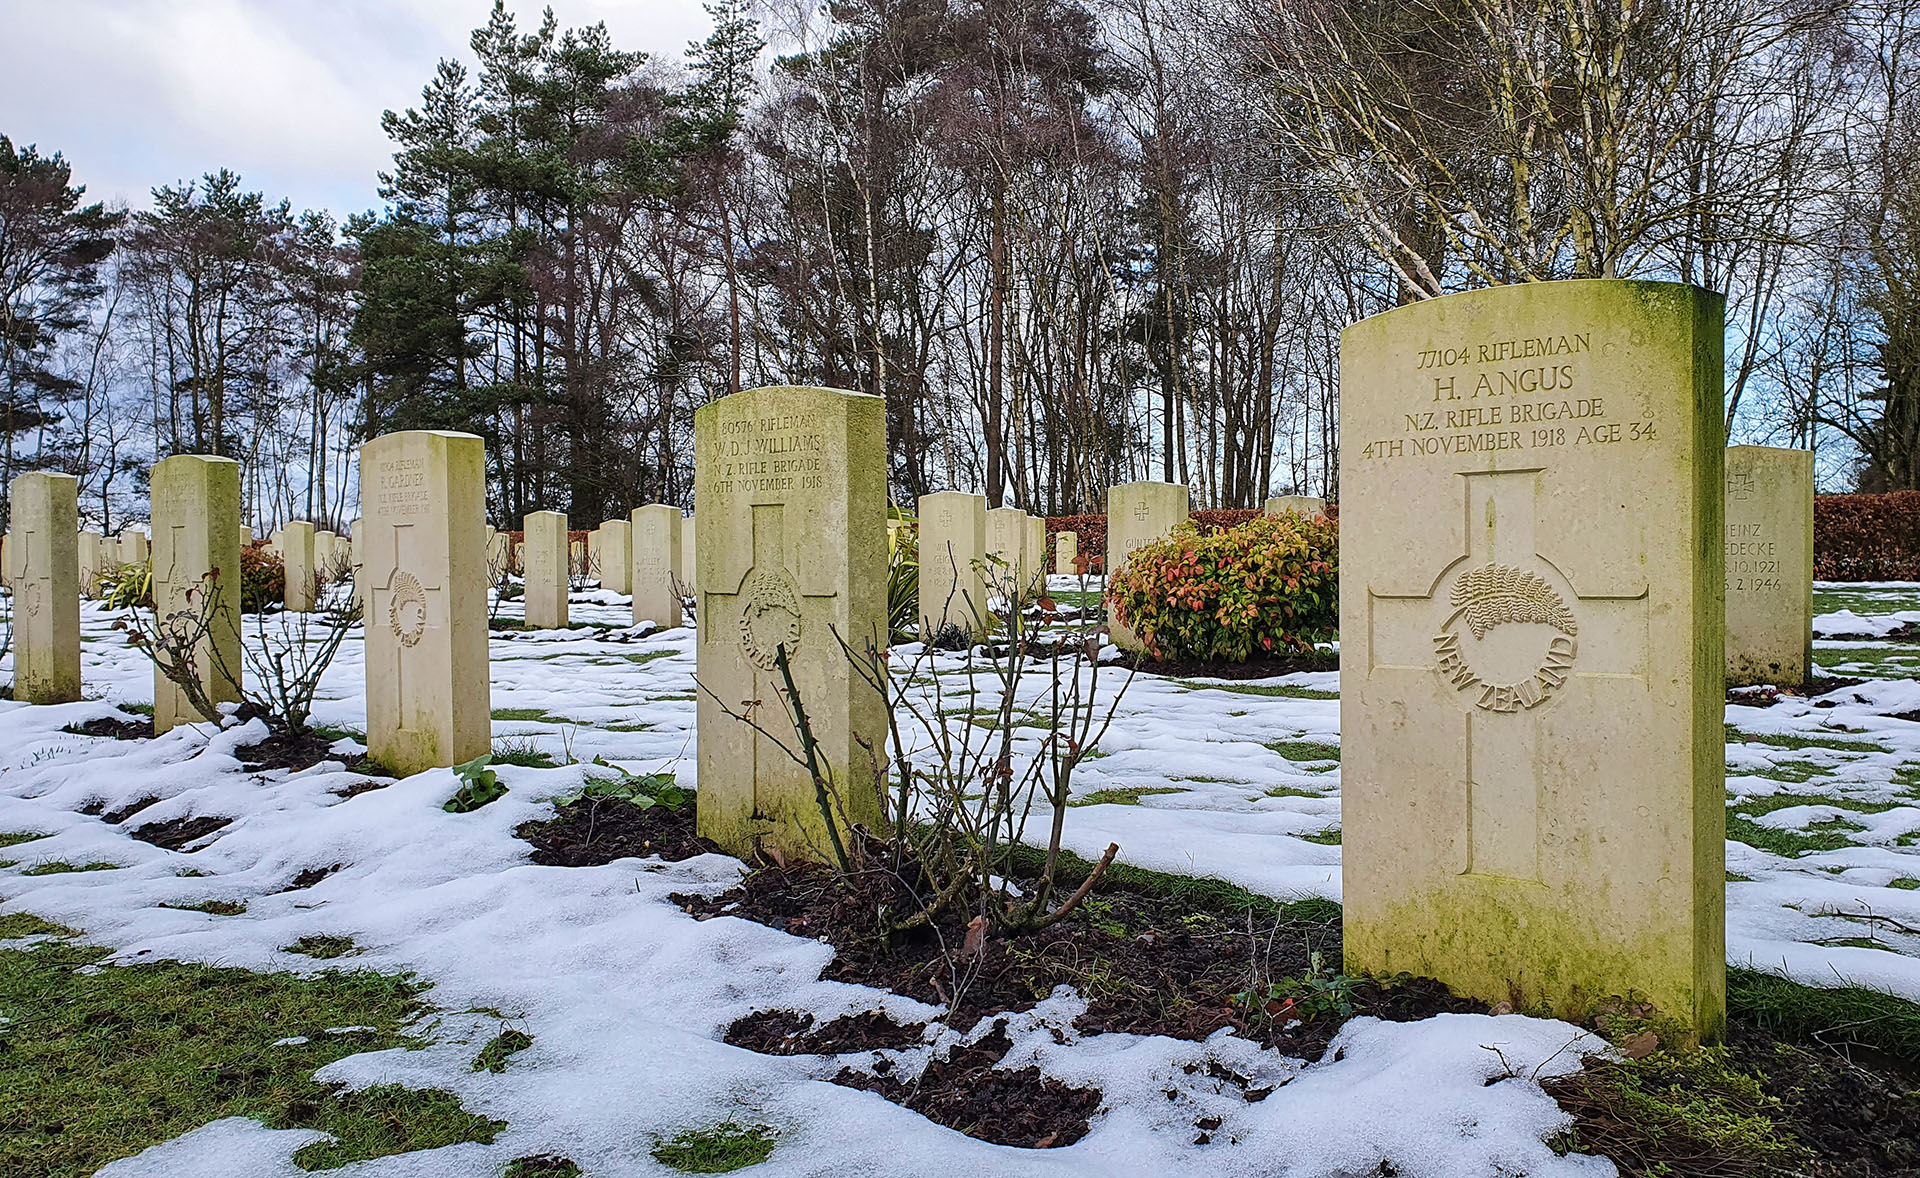 Soldiers from the New Zealand Rifle Brigade are buried at the Commonwealth War Graves Commission cemetery near Broadhurst Green